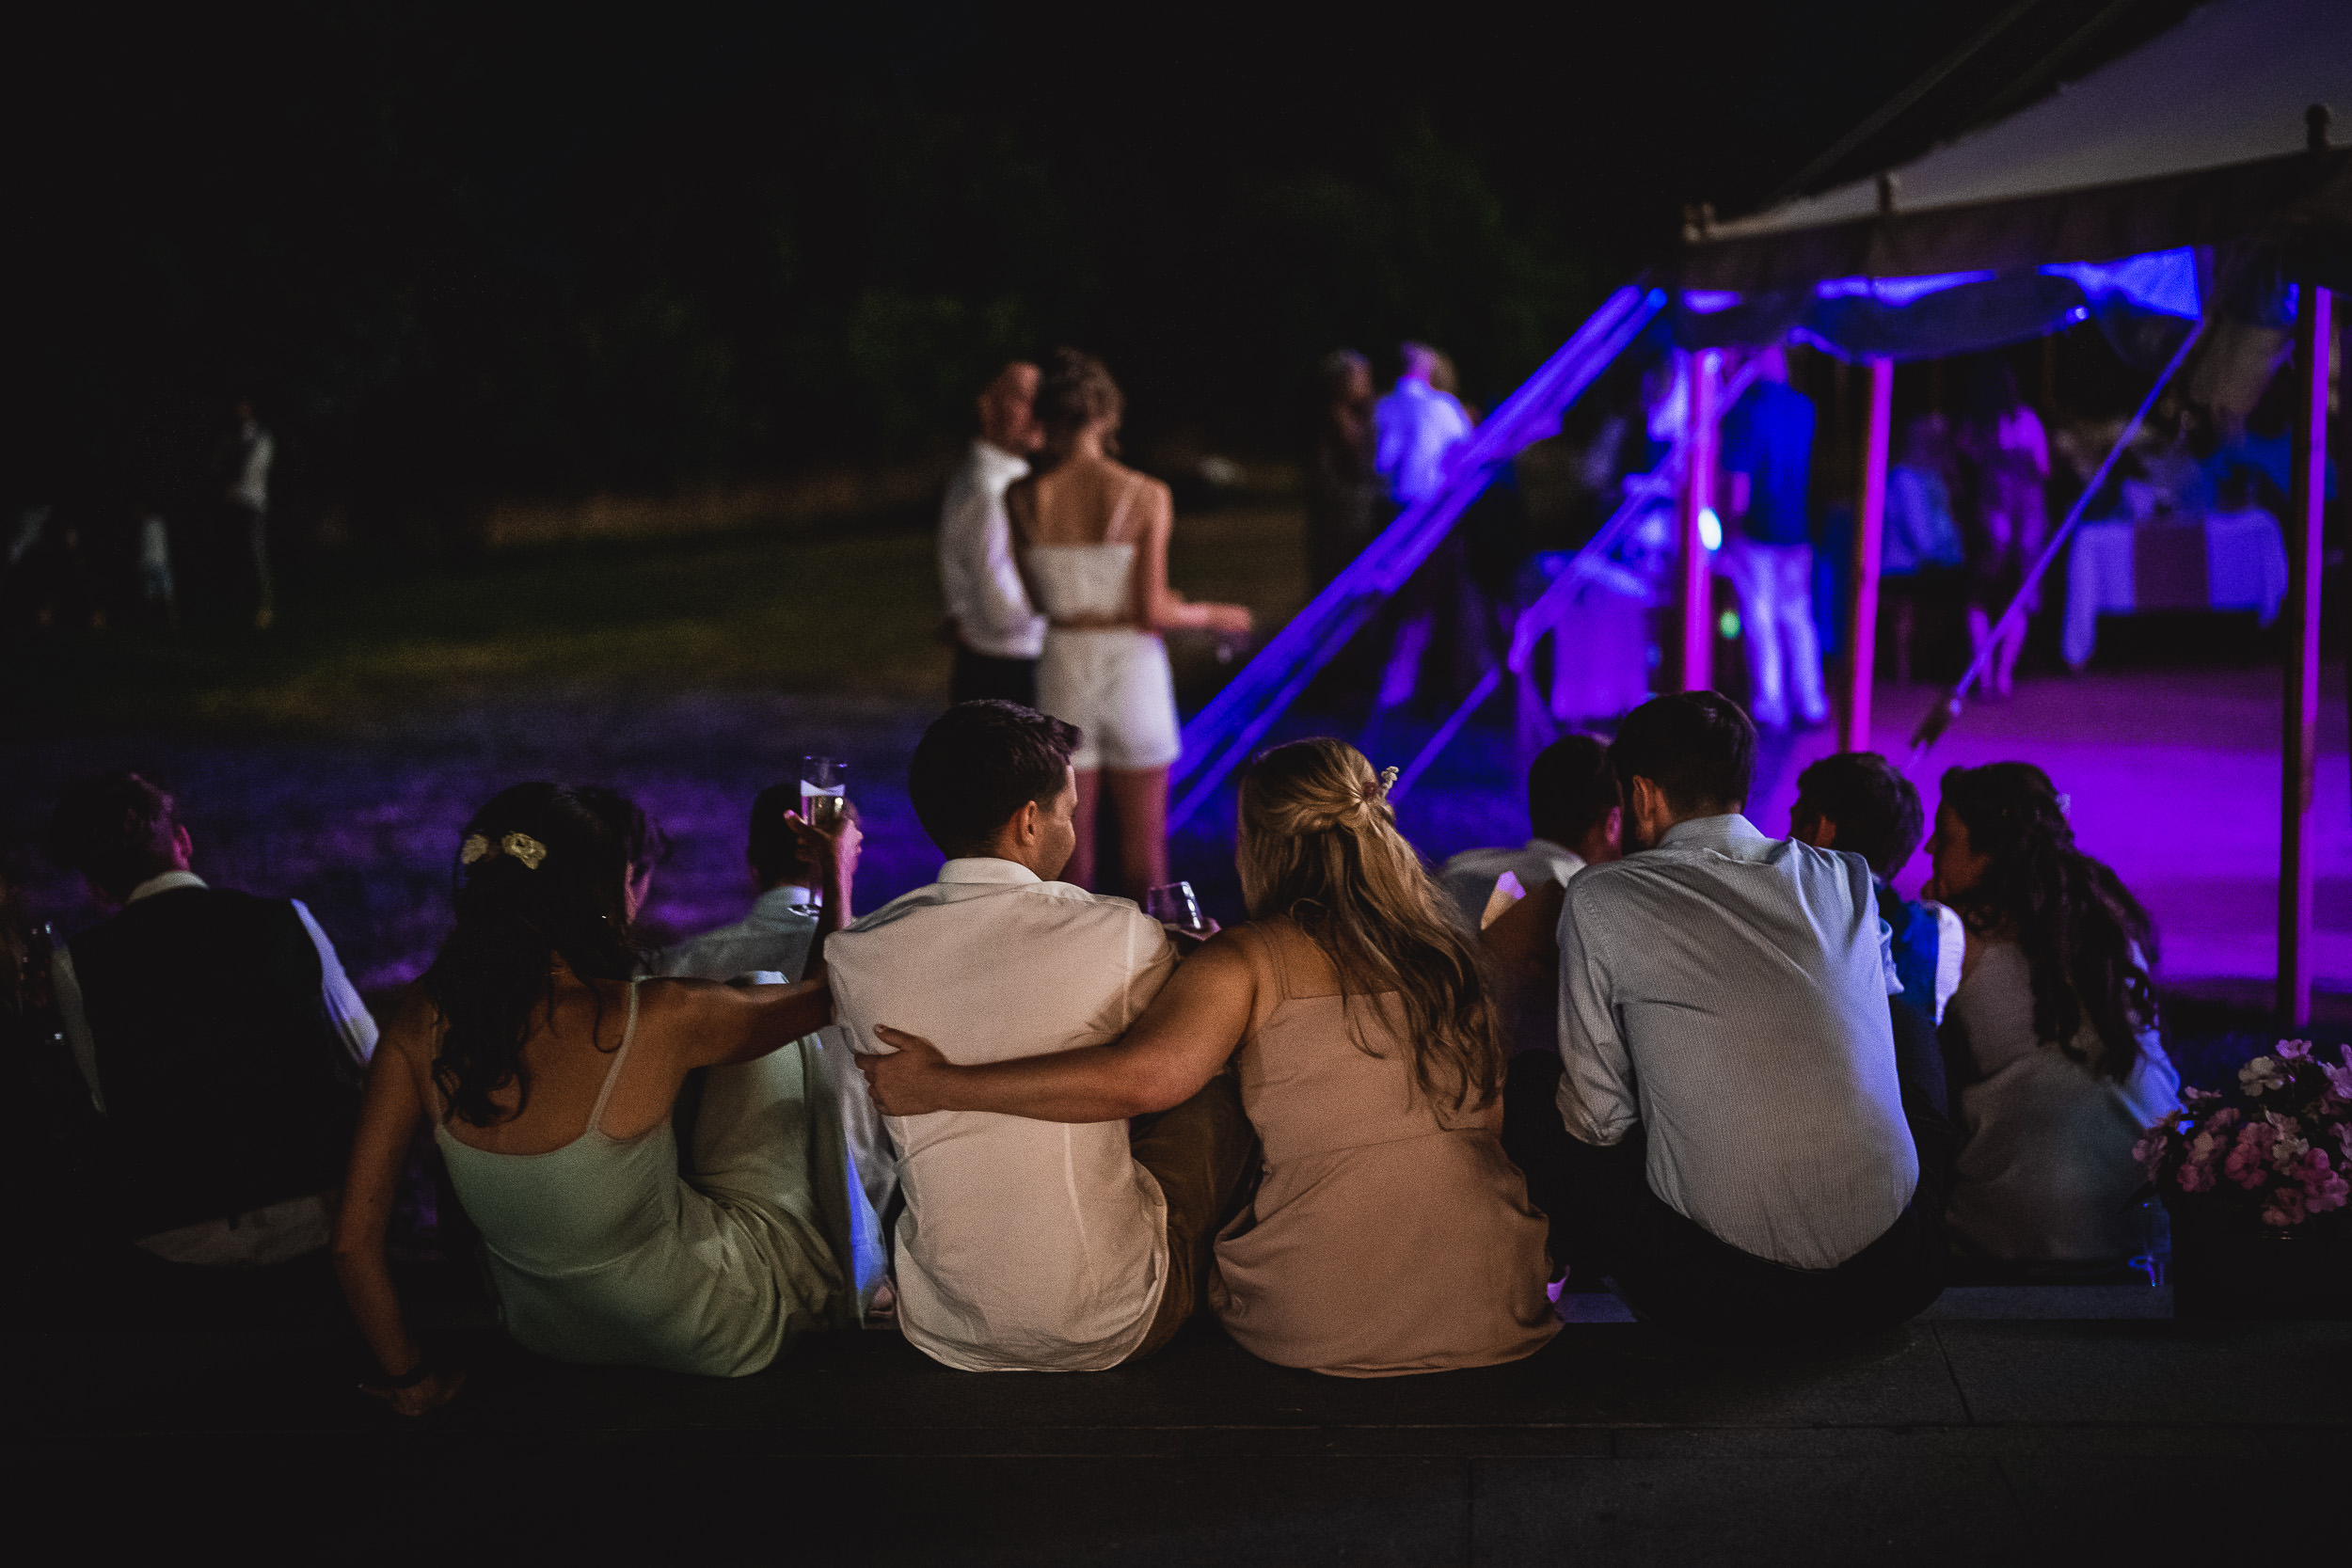 A group of people, including the groom and bride, sitting in front of a tent at night.